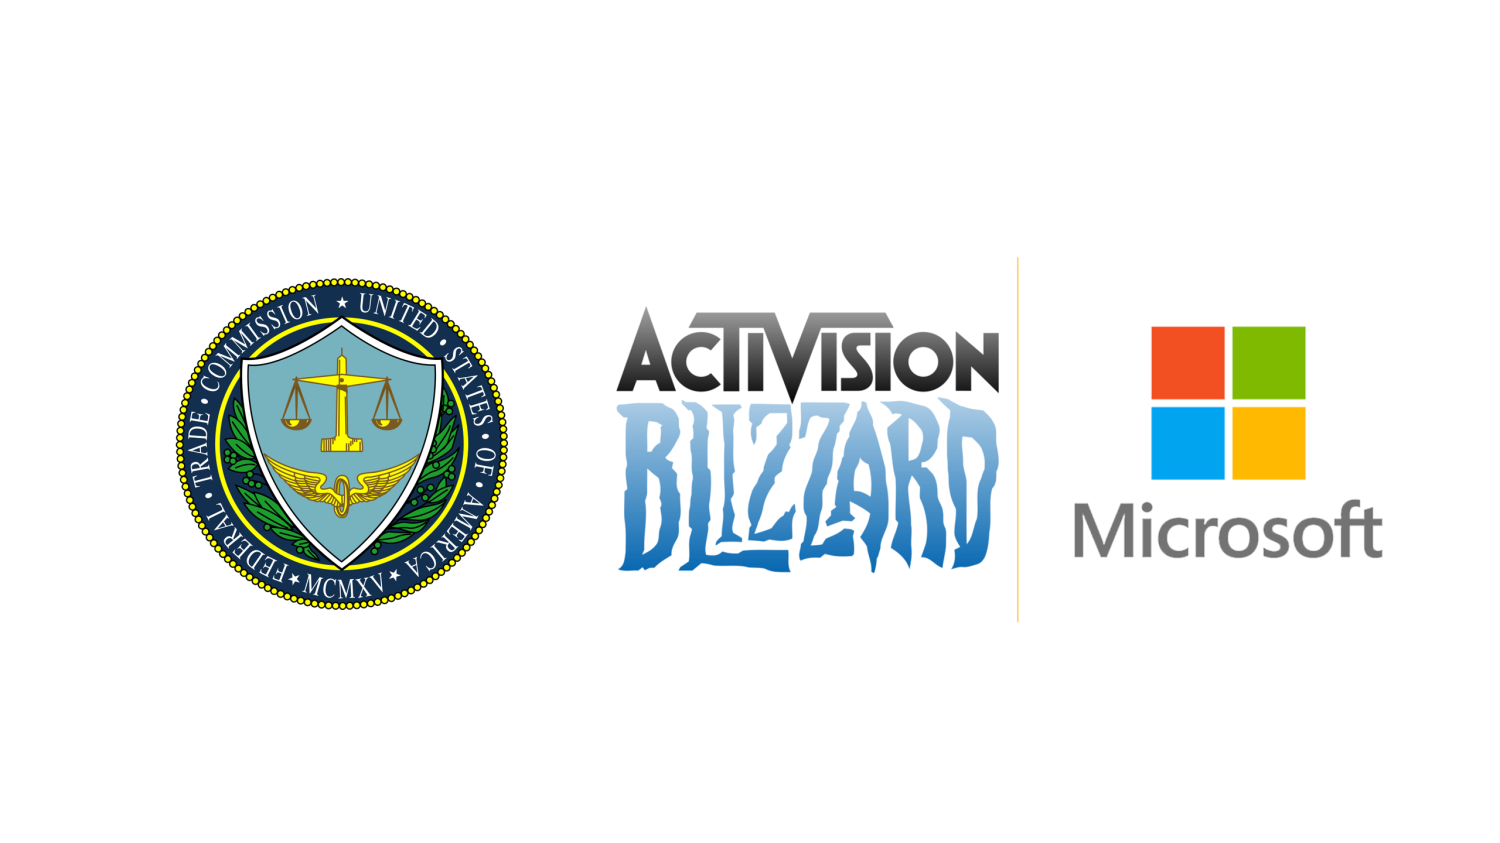 FTC files injunction to block Microsoft acquisition of Activision